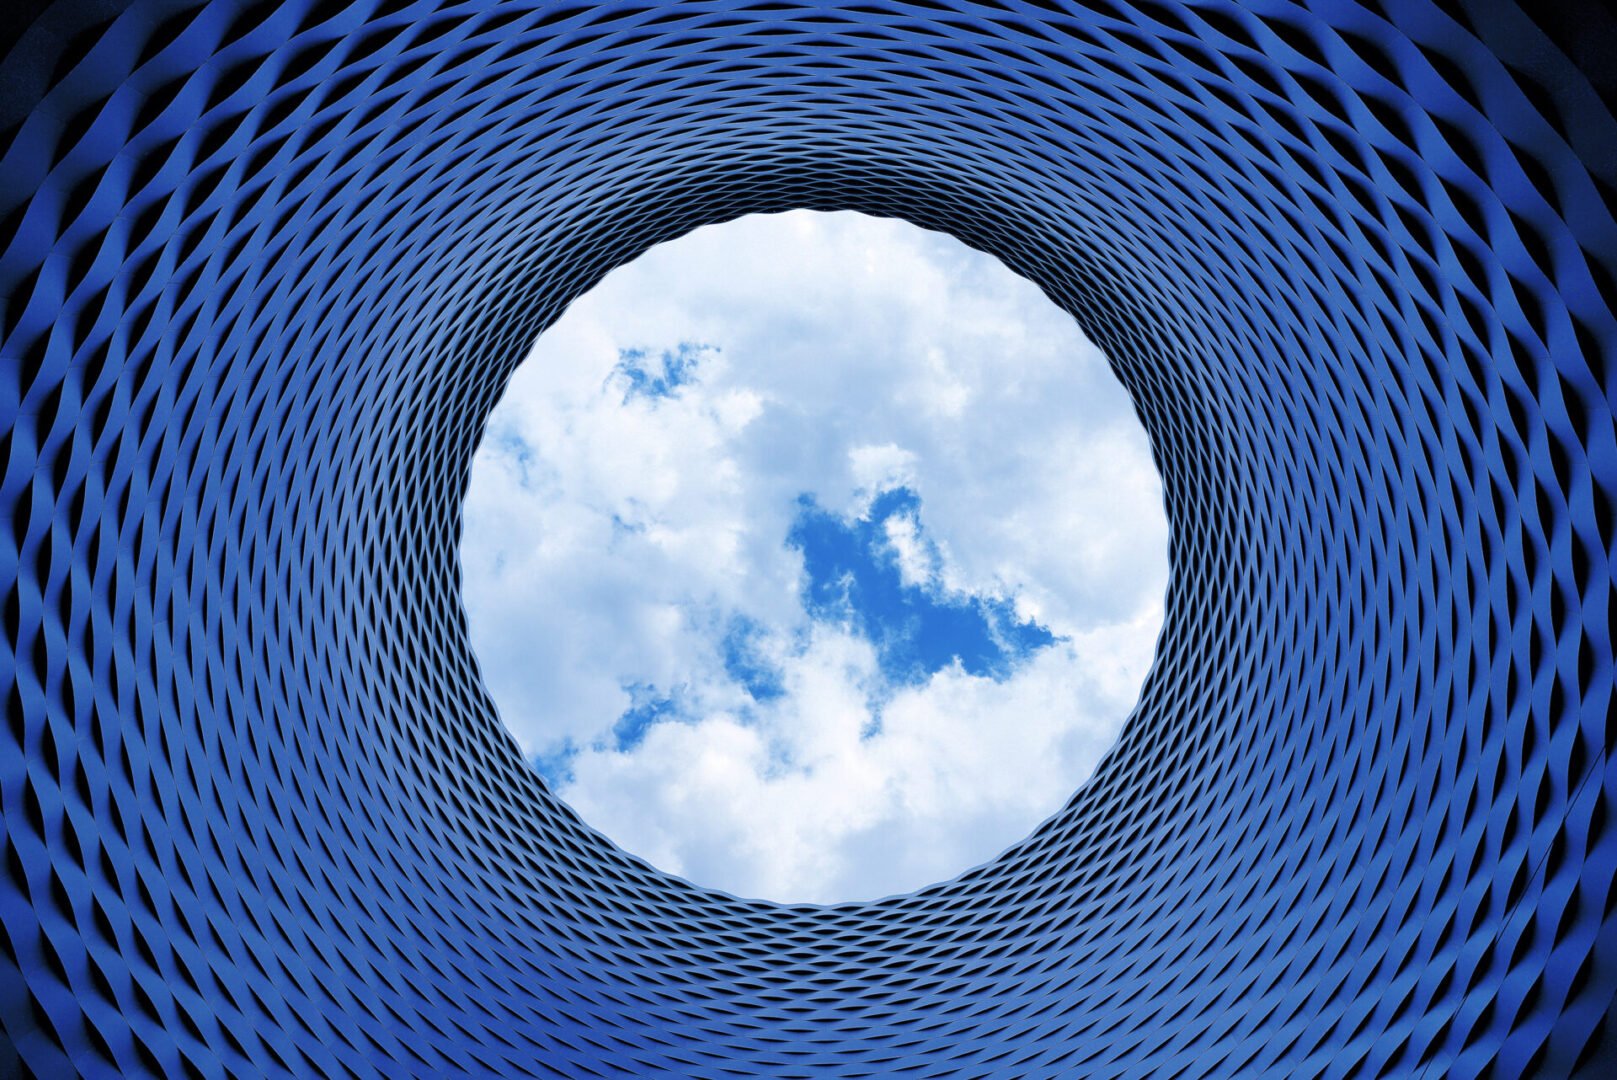 Image of a sky from a dome